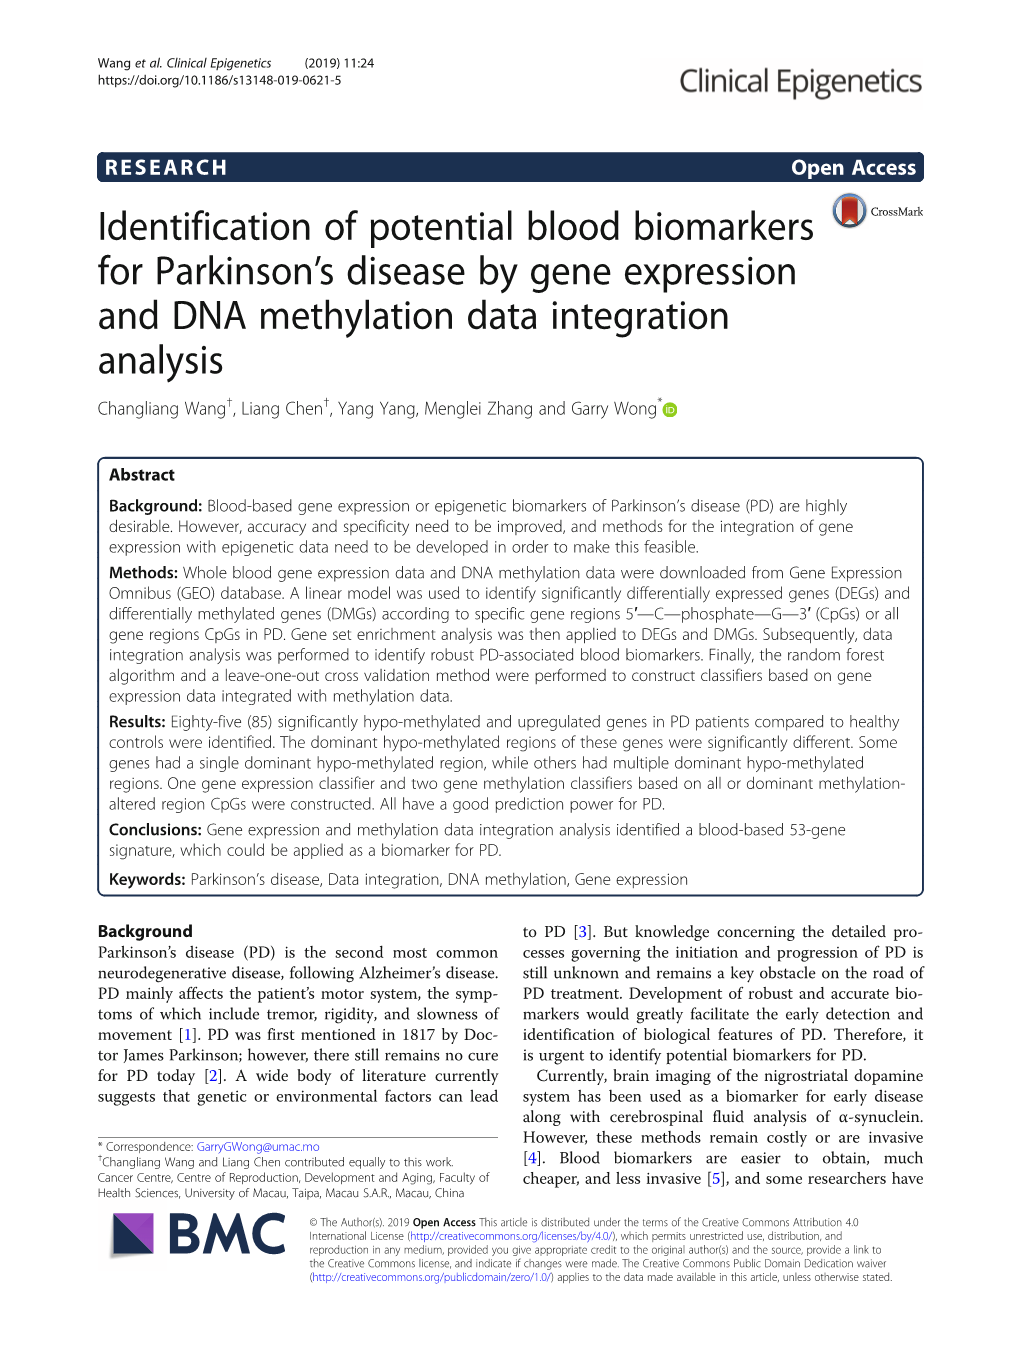 Identification of Potential Blood Biomarkers for Parkinson's Disease